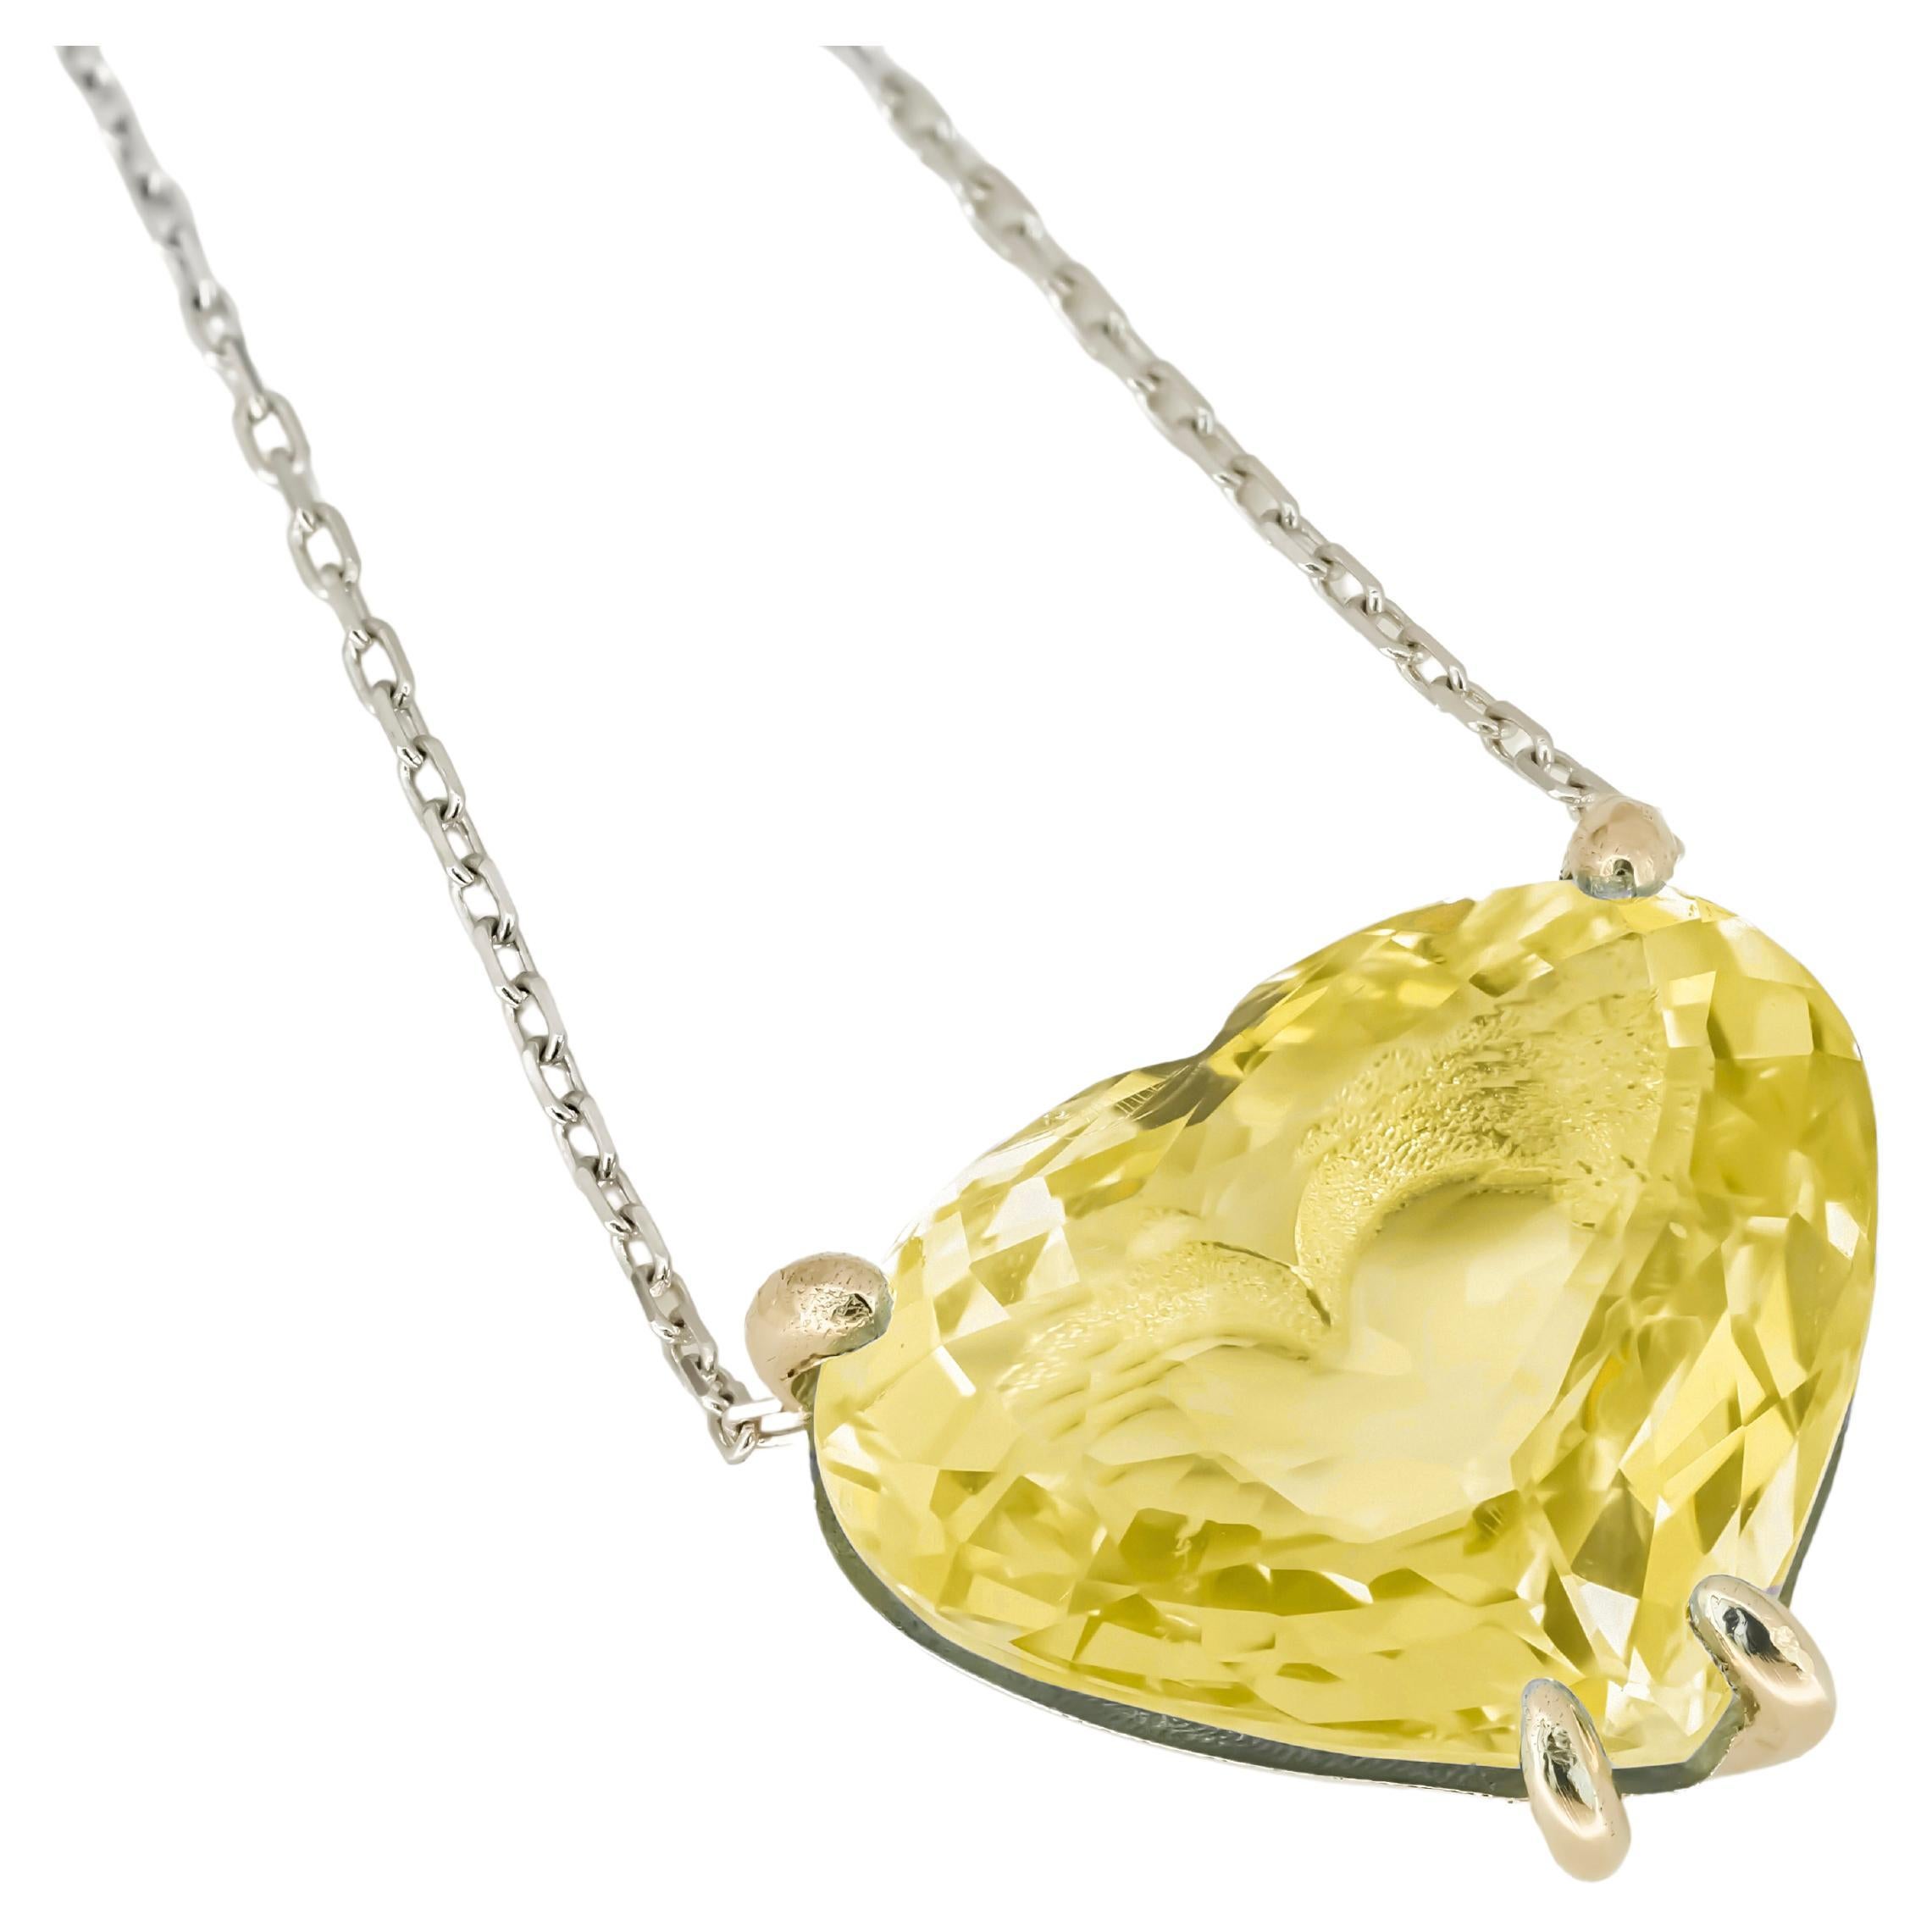 Heart shaped citrine pendant necklace in 14k gold.  For Sale